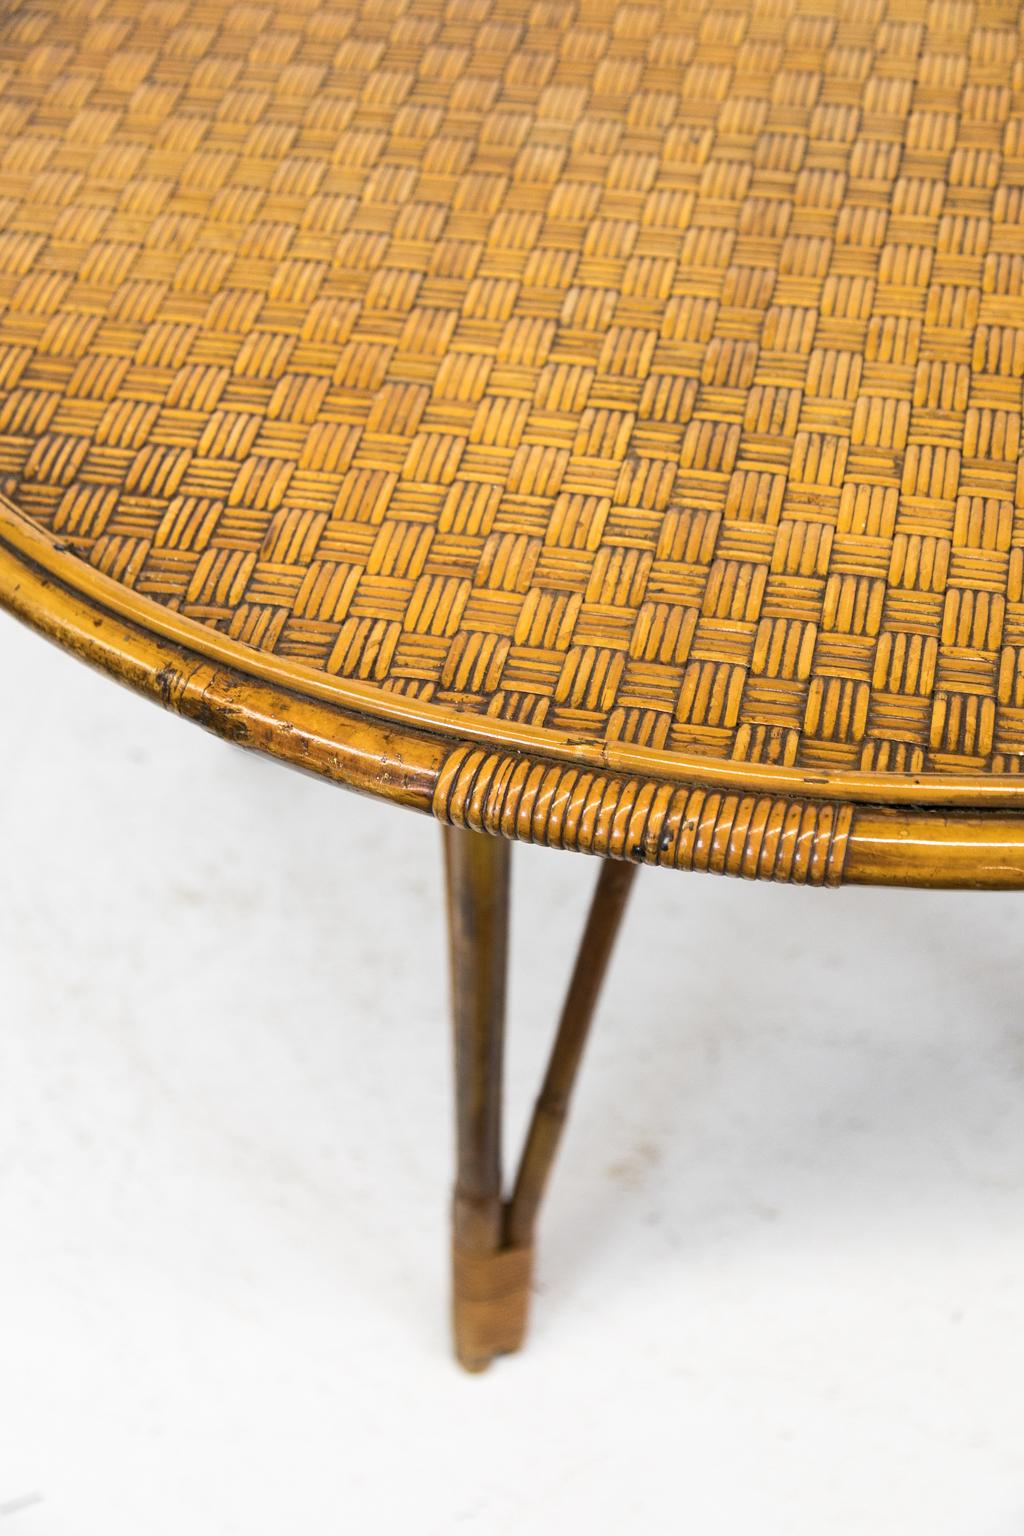 Round bamboo table has four triple bamboo legs bound at the bottom with rattan strapping. The top is made with interlaced split rattan and framed with a 1/8” and a 3/8” band.
 